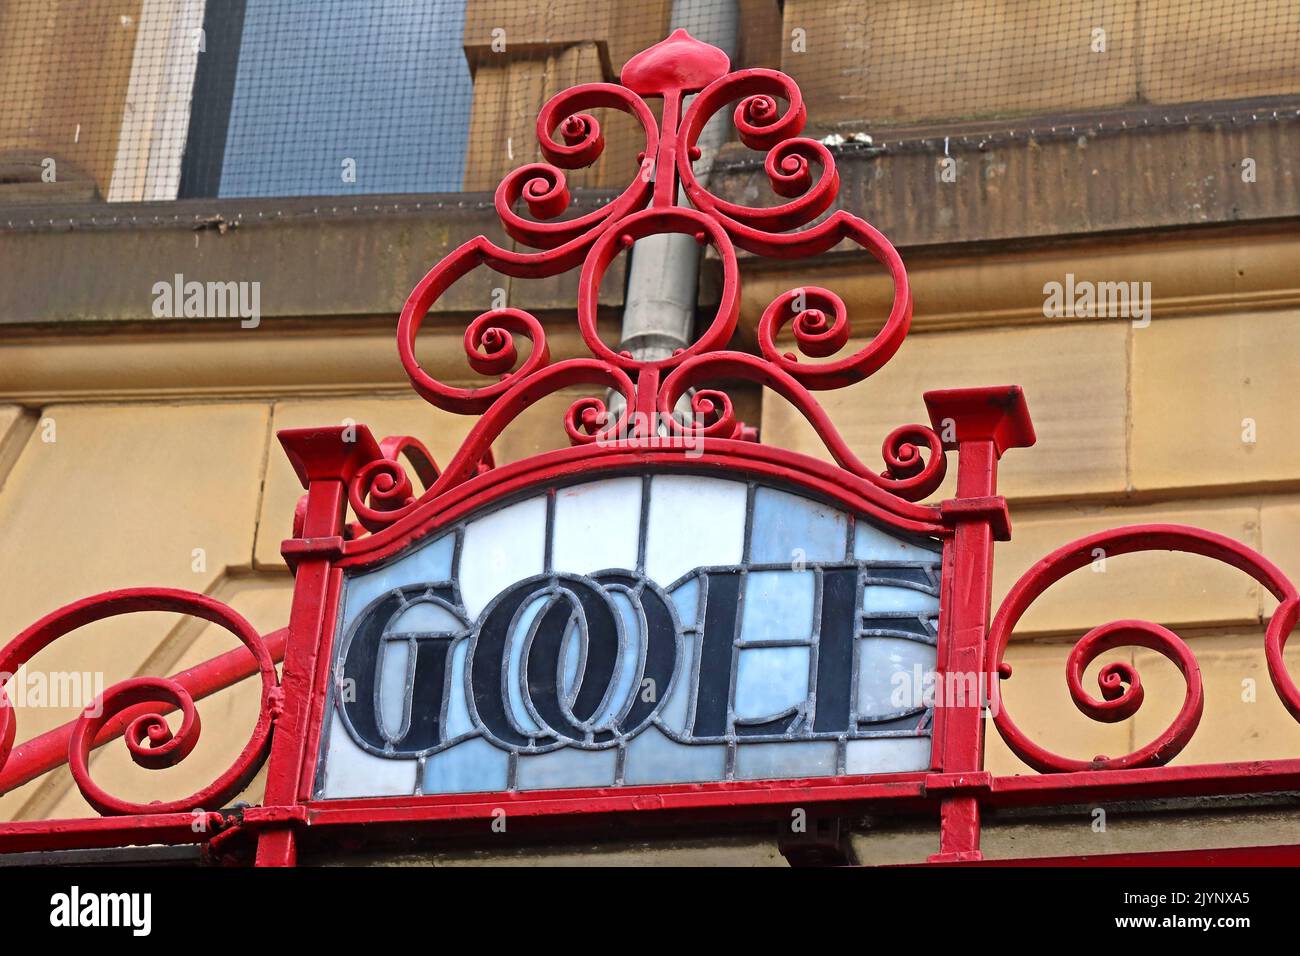 Goole - Art Nouveau, lettering,words showing M&LR and L&YR destination on ornate glass & iron canopy, Manchester Victoria railway station Stock Photo